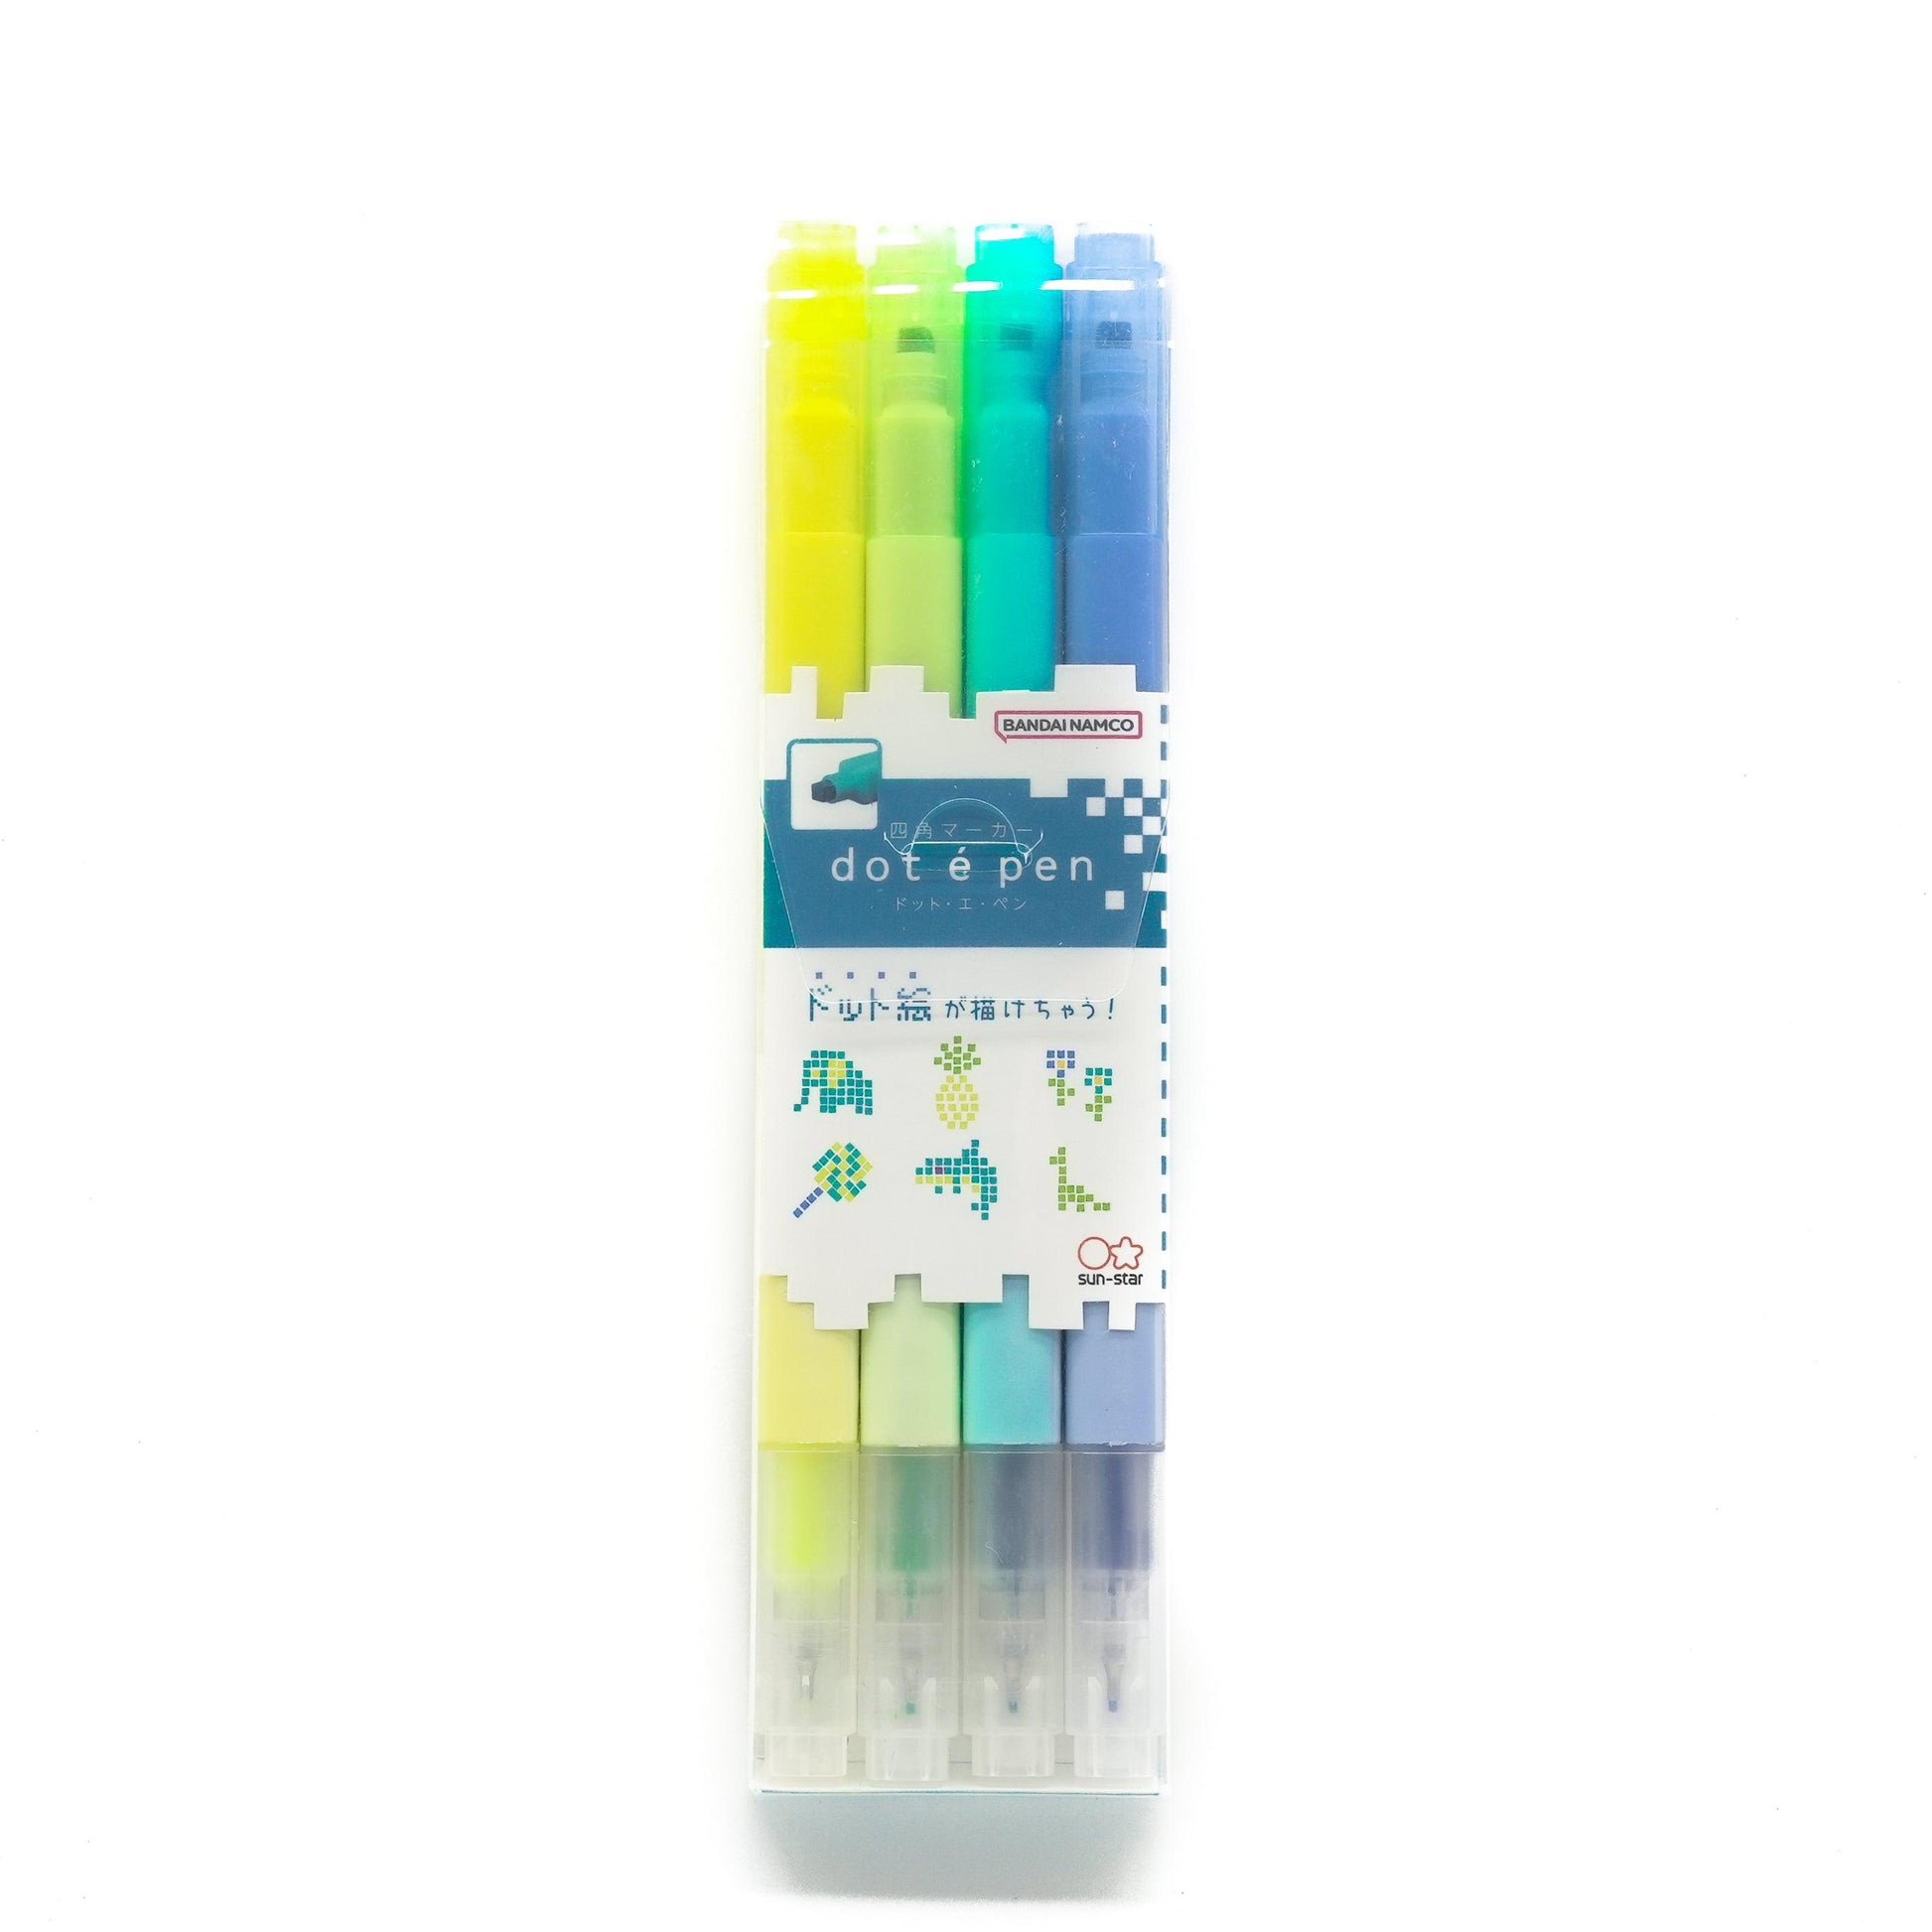 https://chl-store.com/cdn/shop/products/highlighter-sun-star-dot-e-pen-water-based-four-corners-2-brushes-marker-painting-marker-art-supplies-stationery-creativity-art-student-office-girls-4-color-set-s4541-chl-store-1.jpg?v=1695885504&width=1946